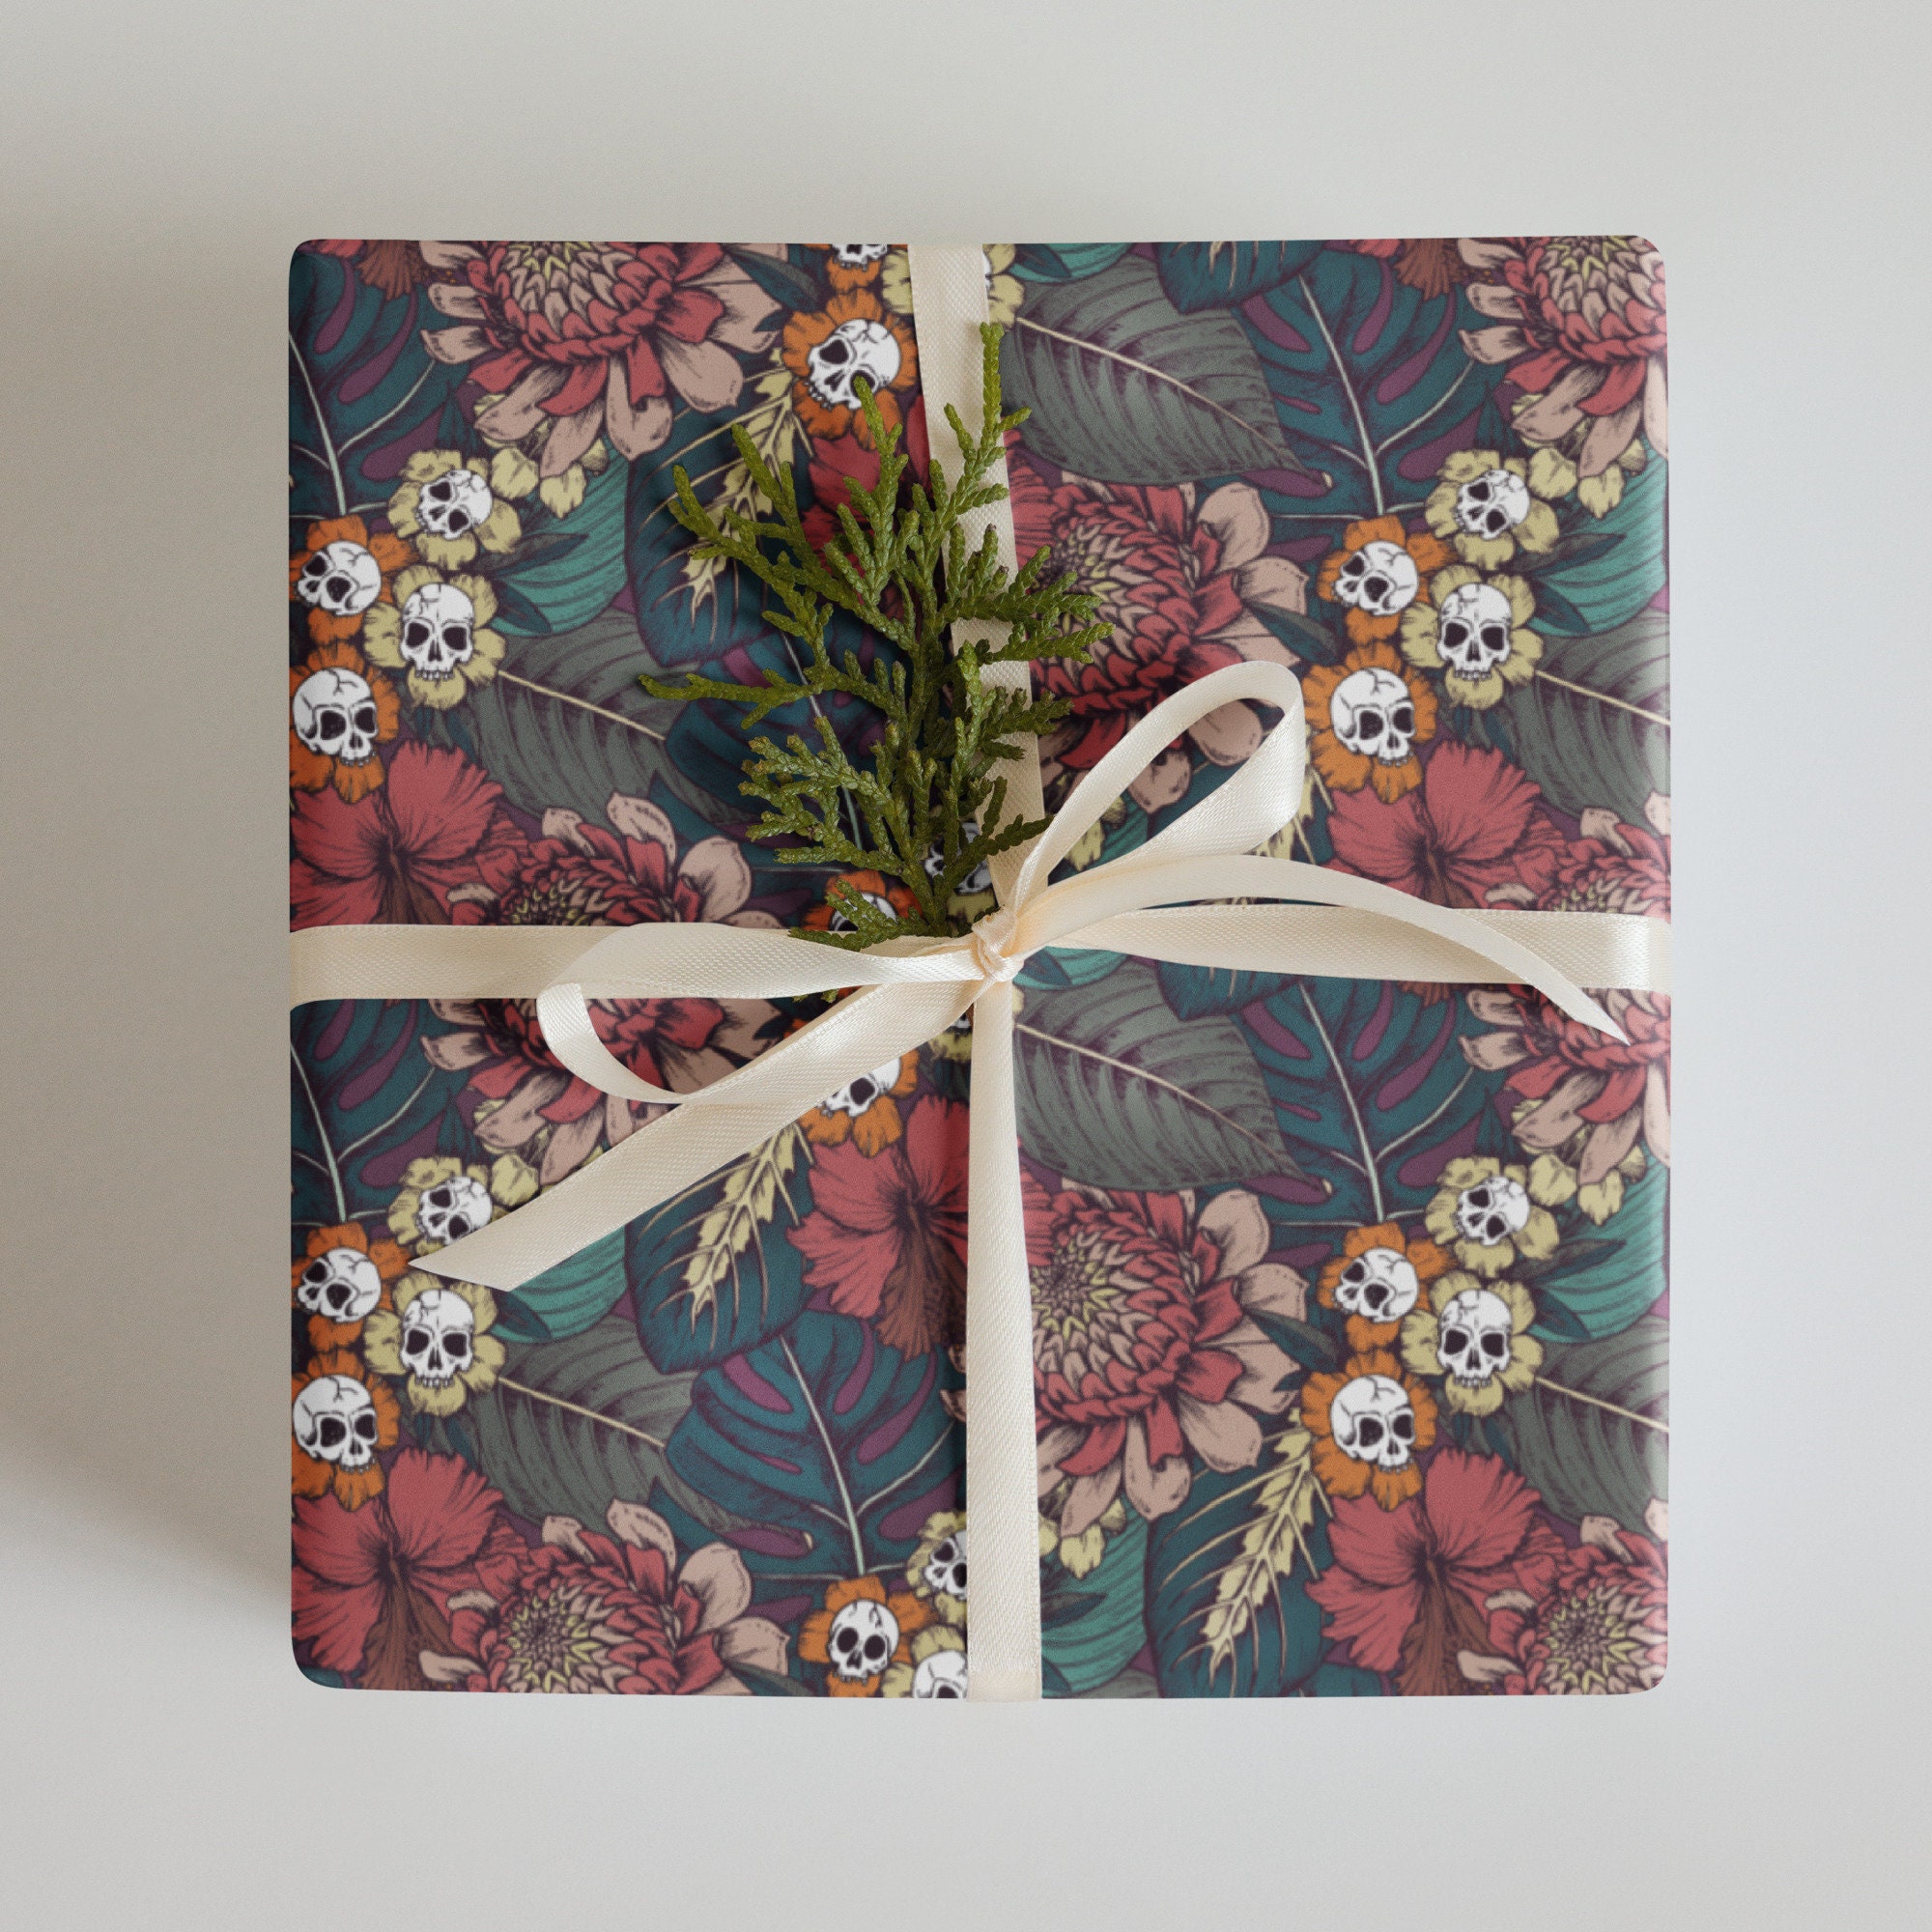 Gothic Floral Wrapping Paper, Spooky yet Elegant Macabre Botanical Yule  Craft or Gift Wrap W Deadly Beautiful Dark Cottagecore Skull Flowers 